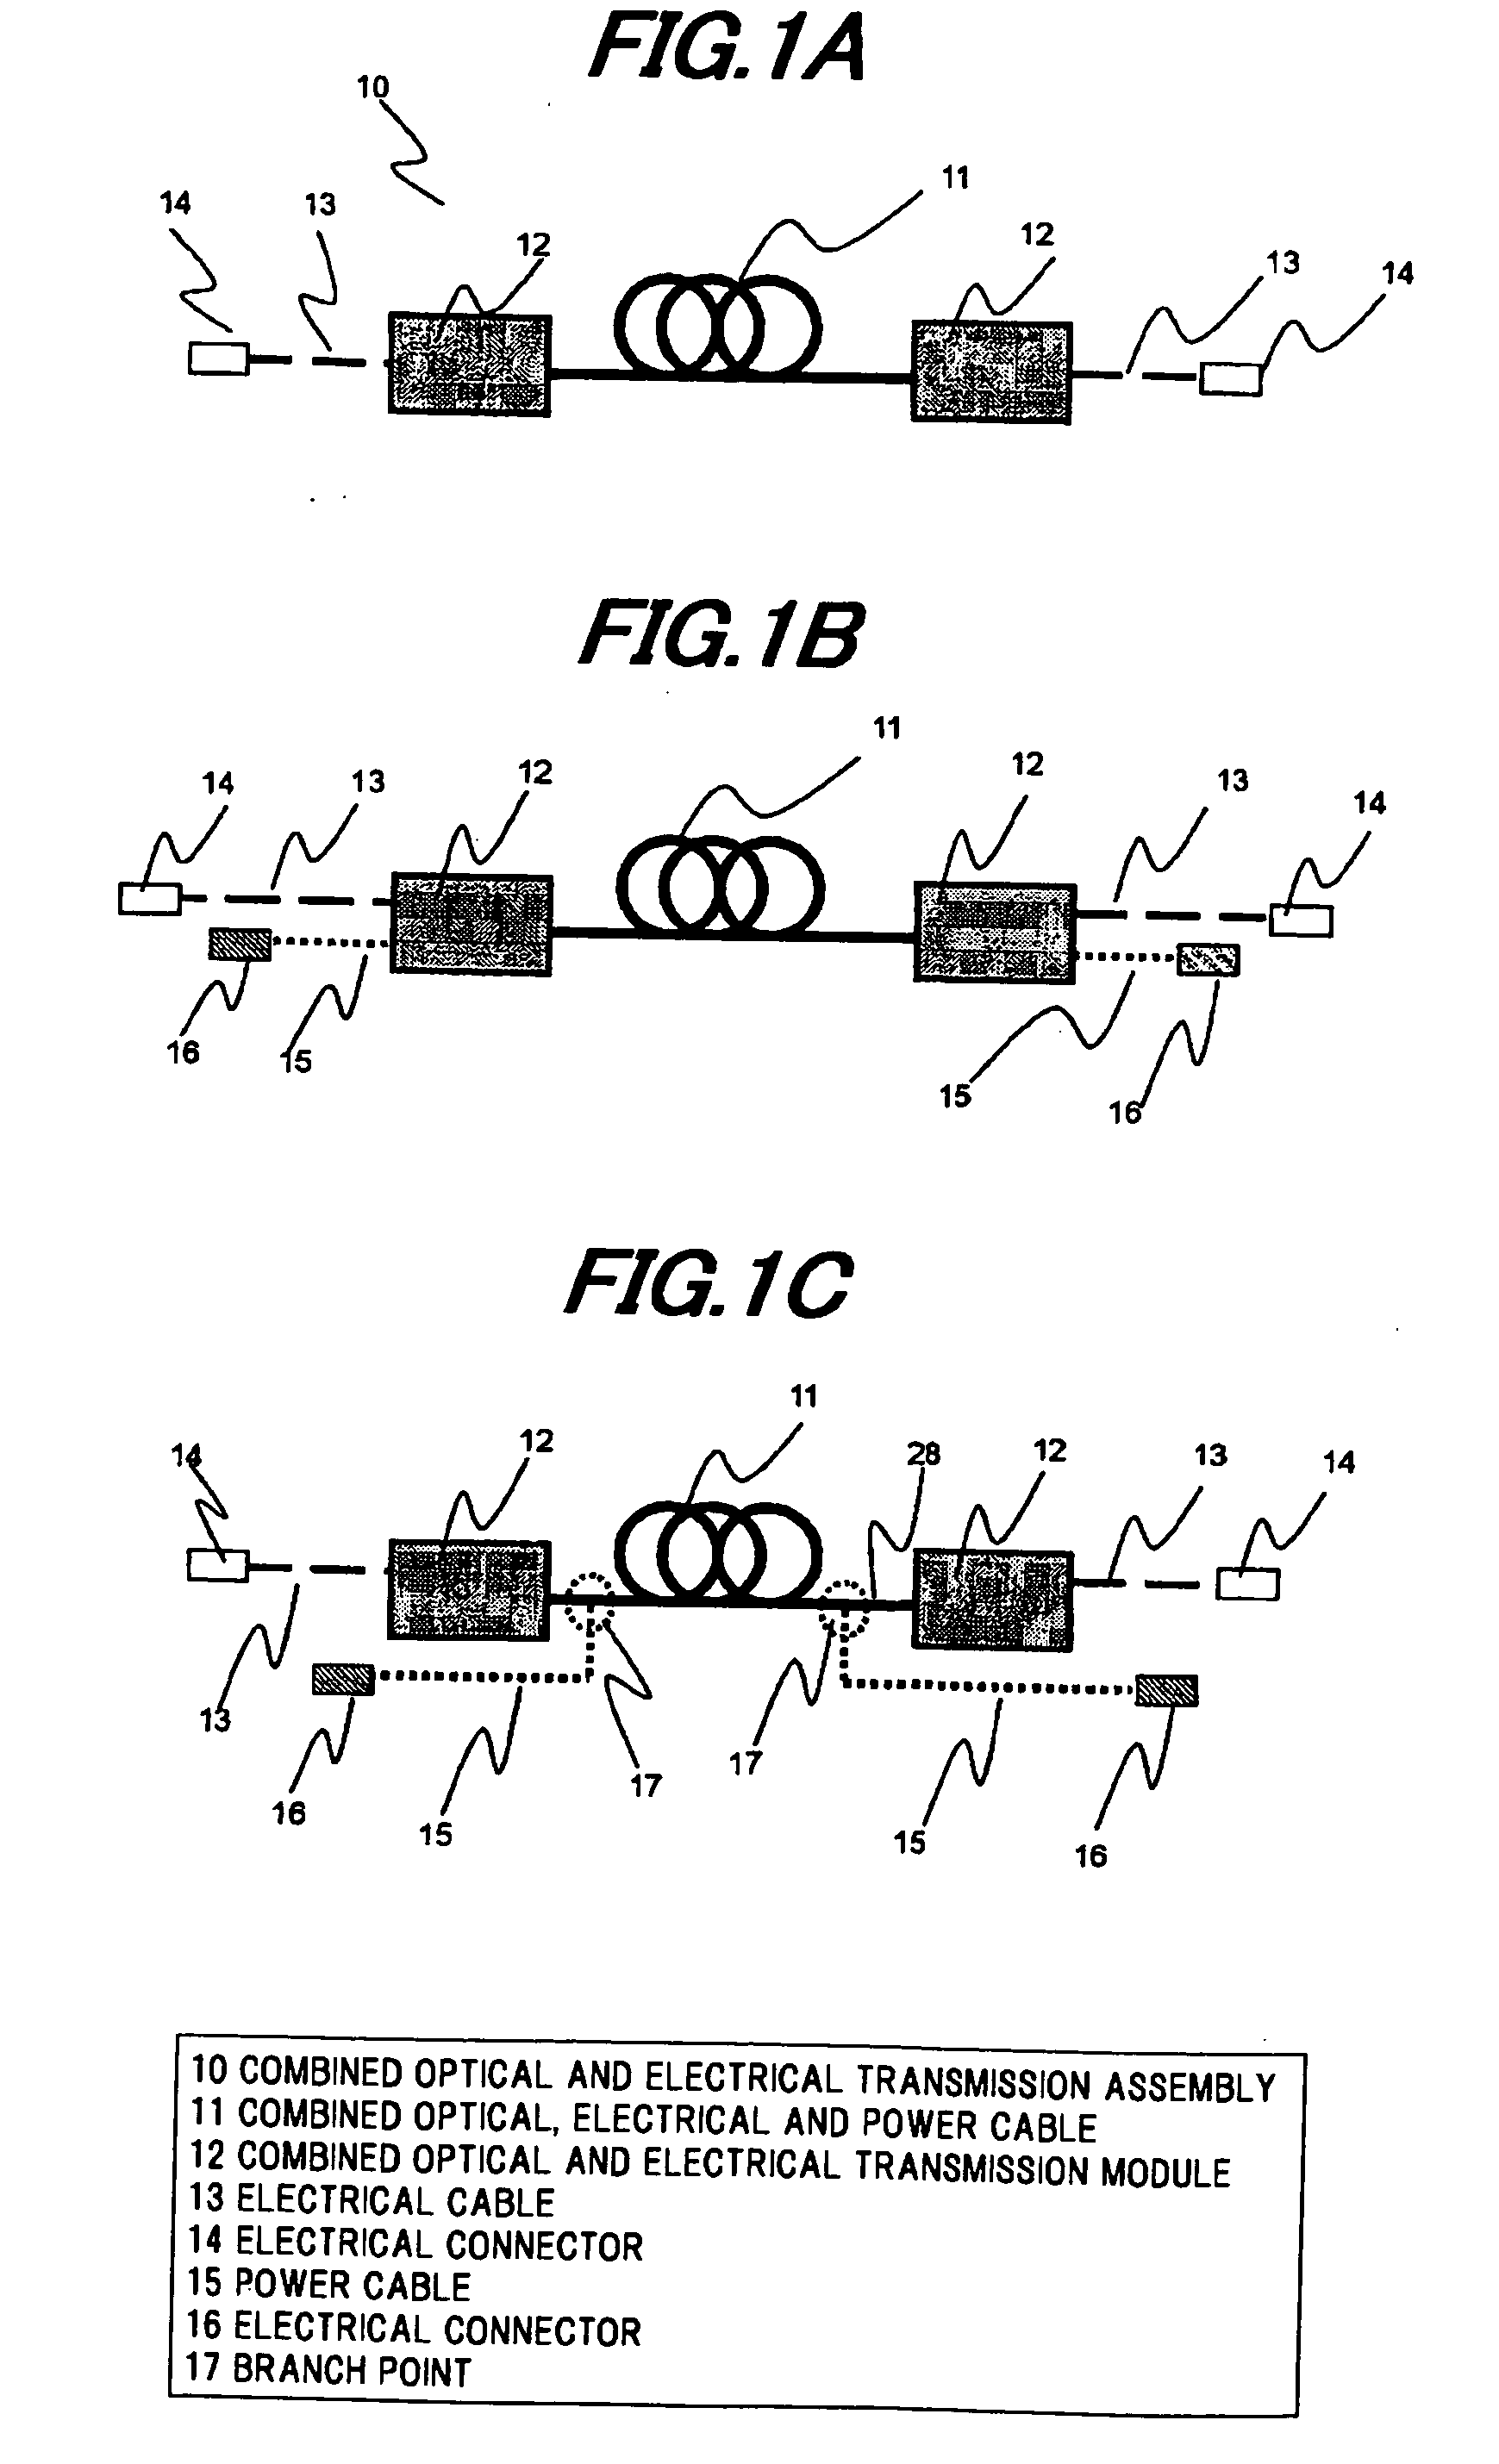 Combined optical and electrical transmission assembly and module